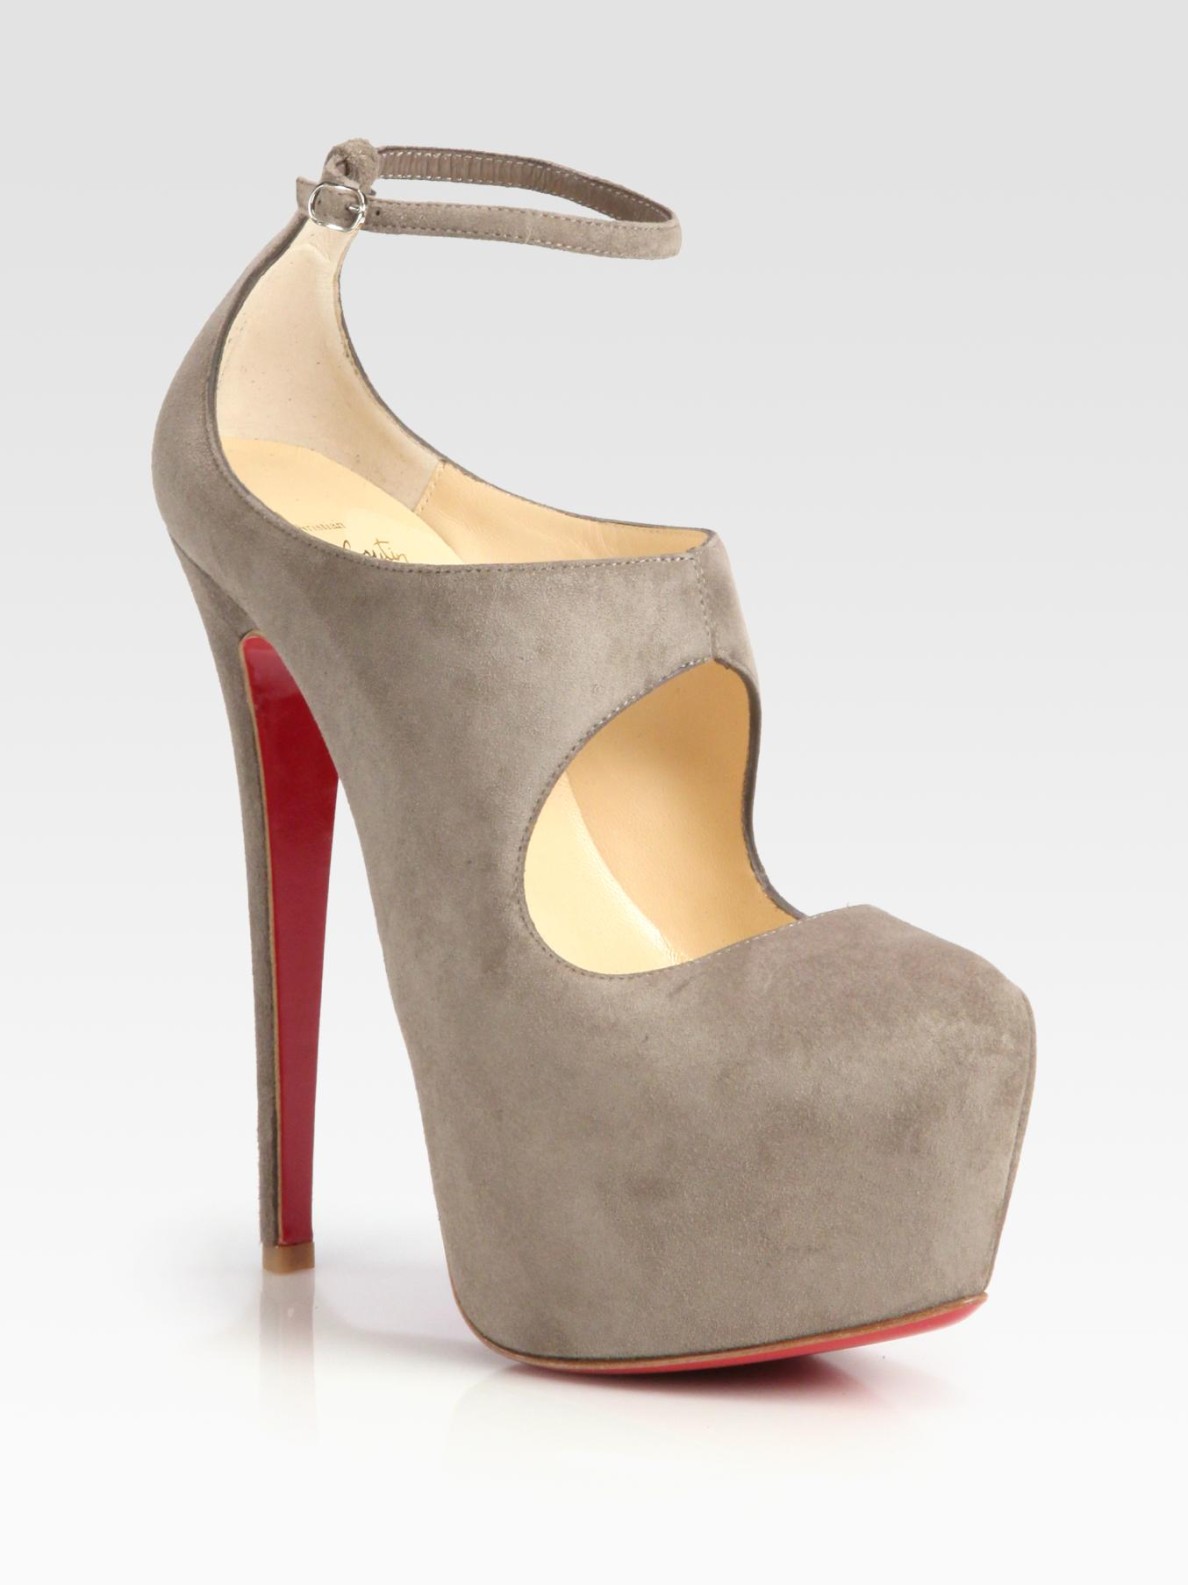 Lyst - Christian Louboutin Maillot Suede Mary Jane Platform Pumps in Brown